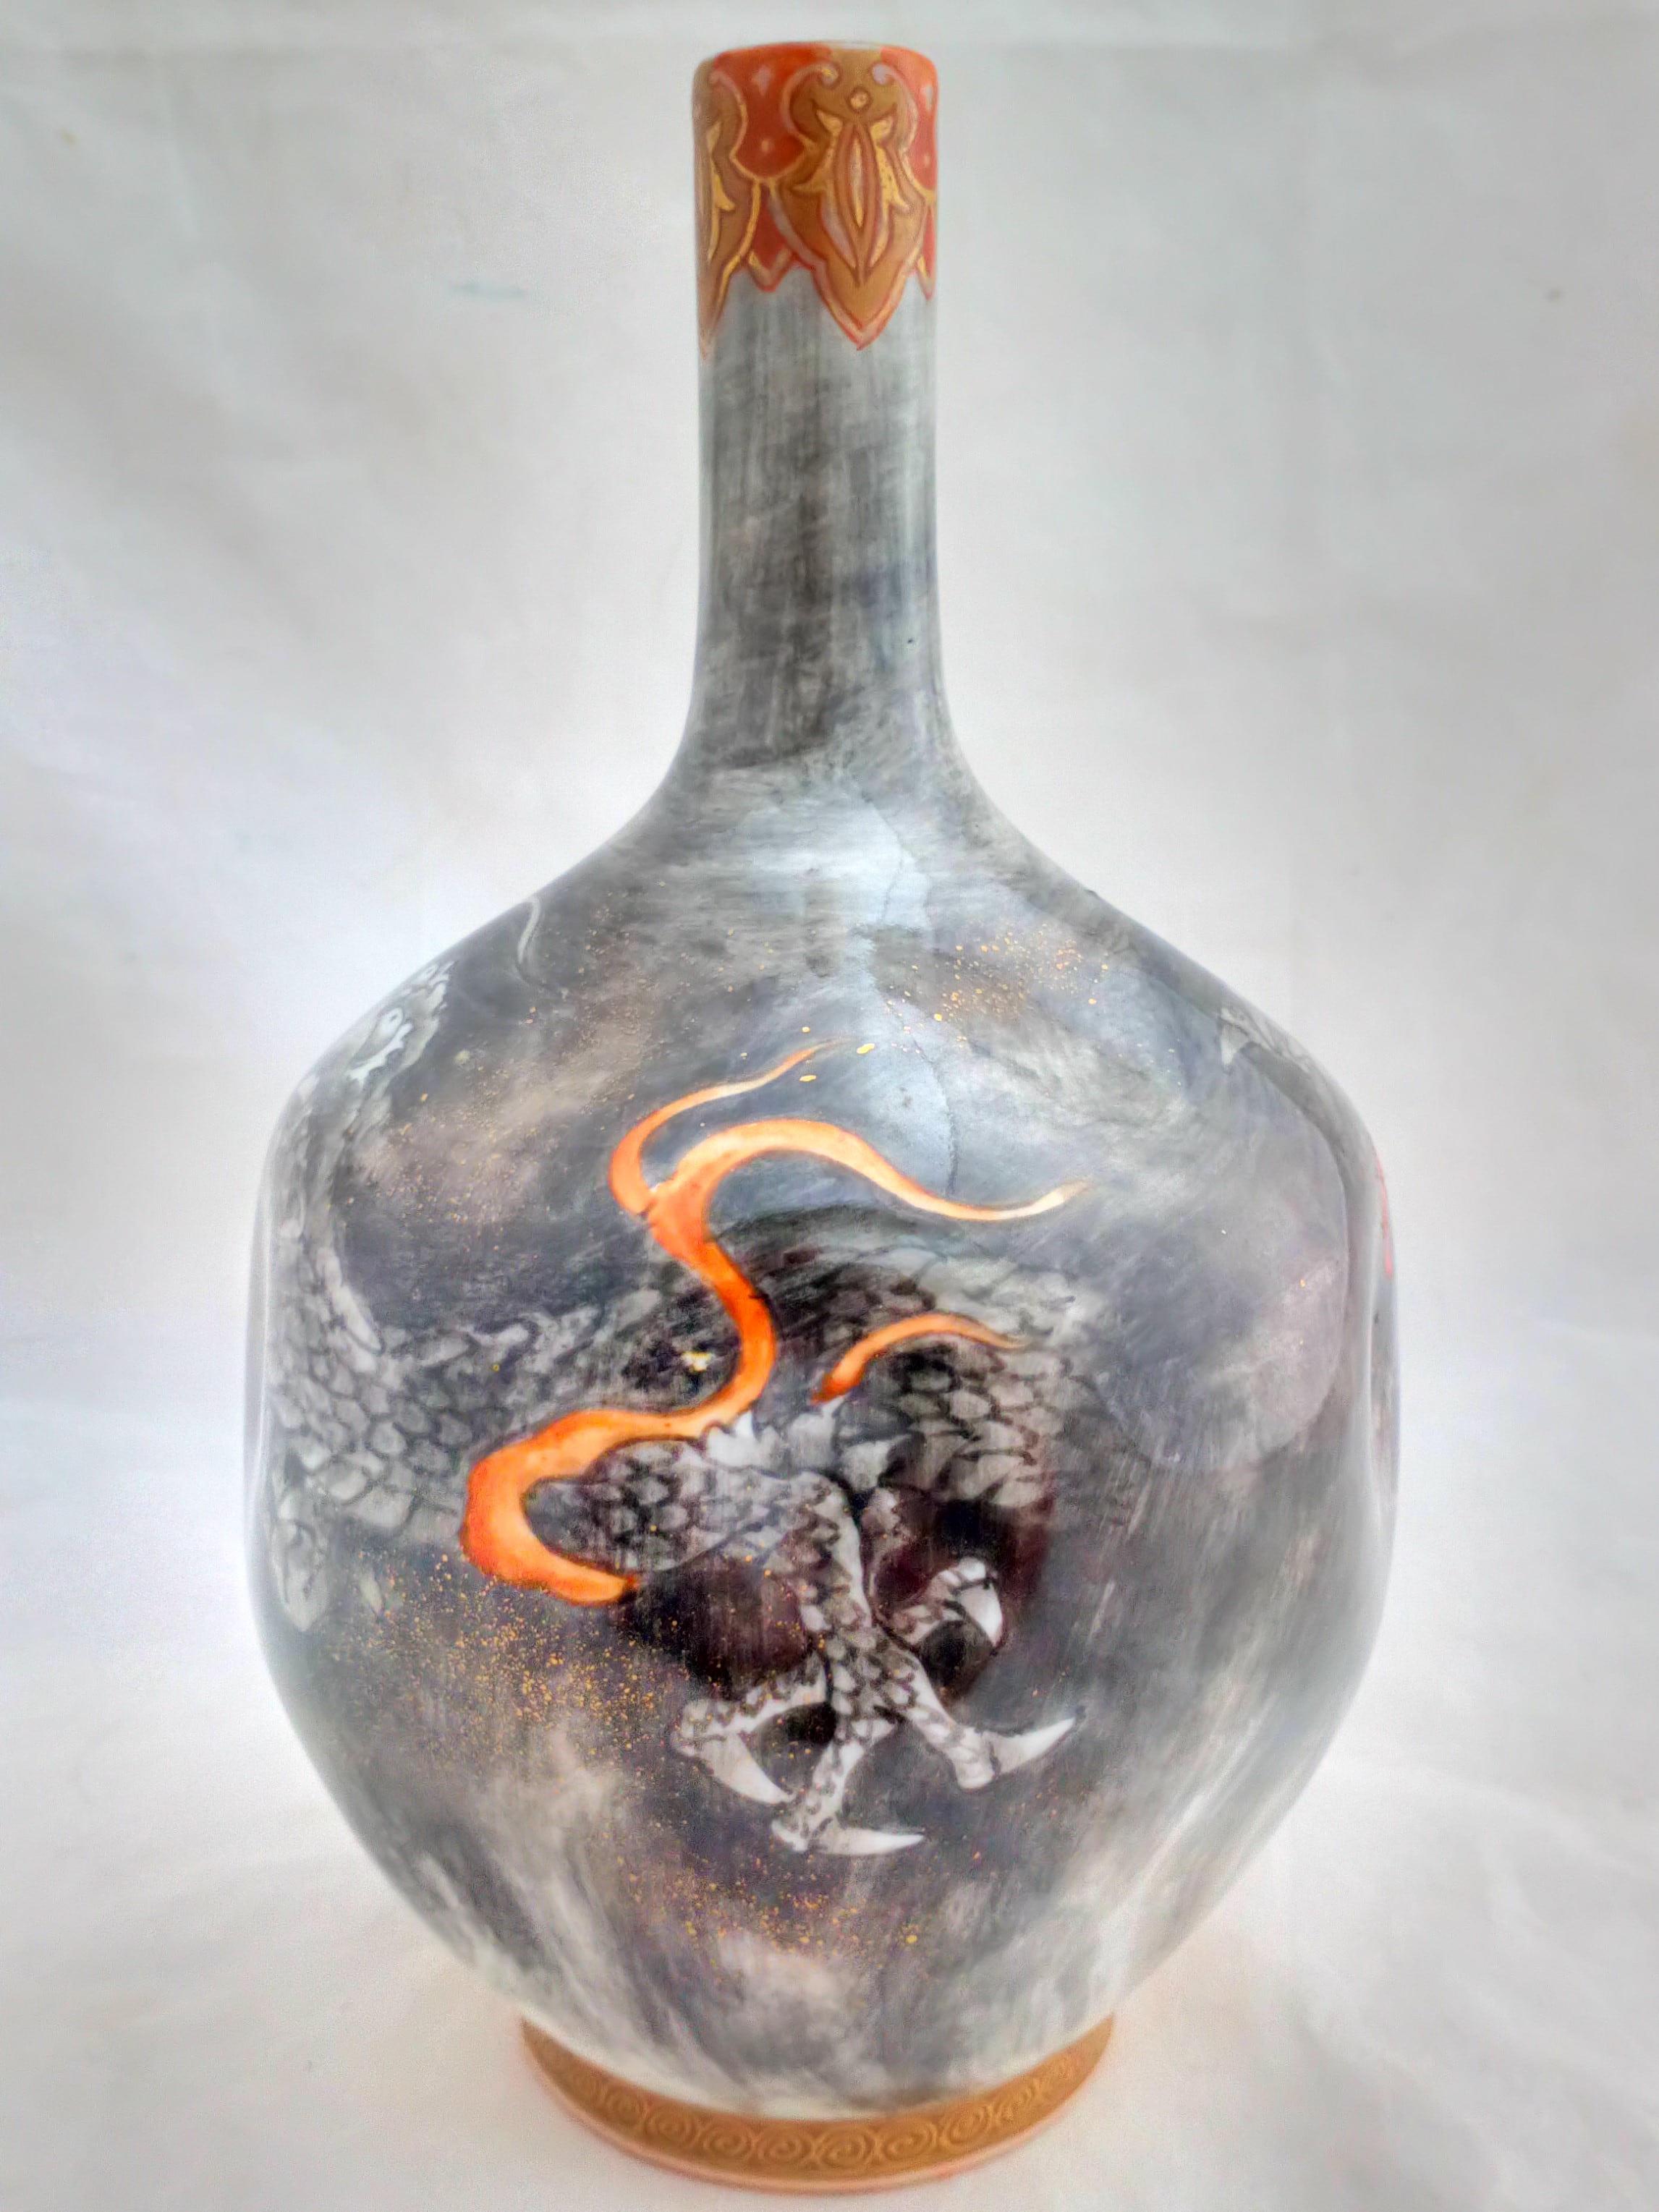 Antique Meiji period Japanese Koransha Fukagawa porcelain bottle vase with dimpled sides decorated with a dragon in swirling clouds in greys and blacks (En Grisaille) circa 1880.